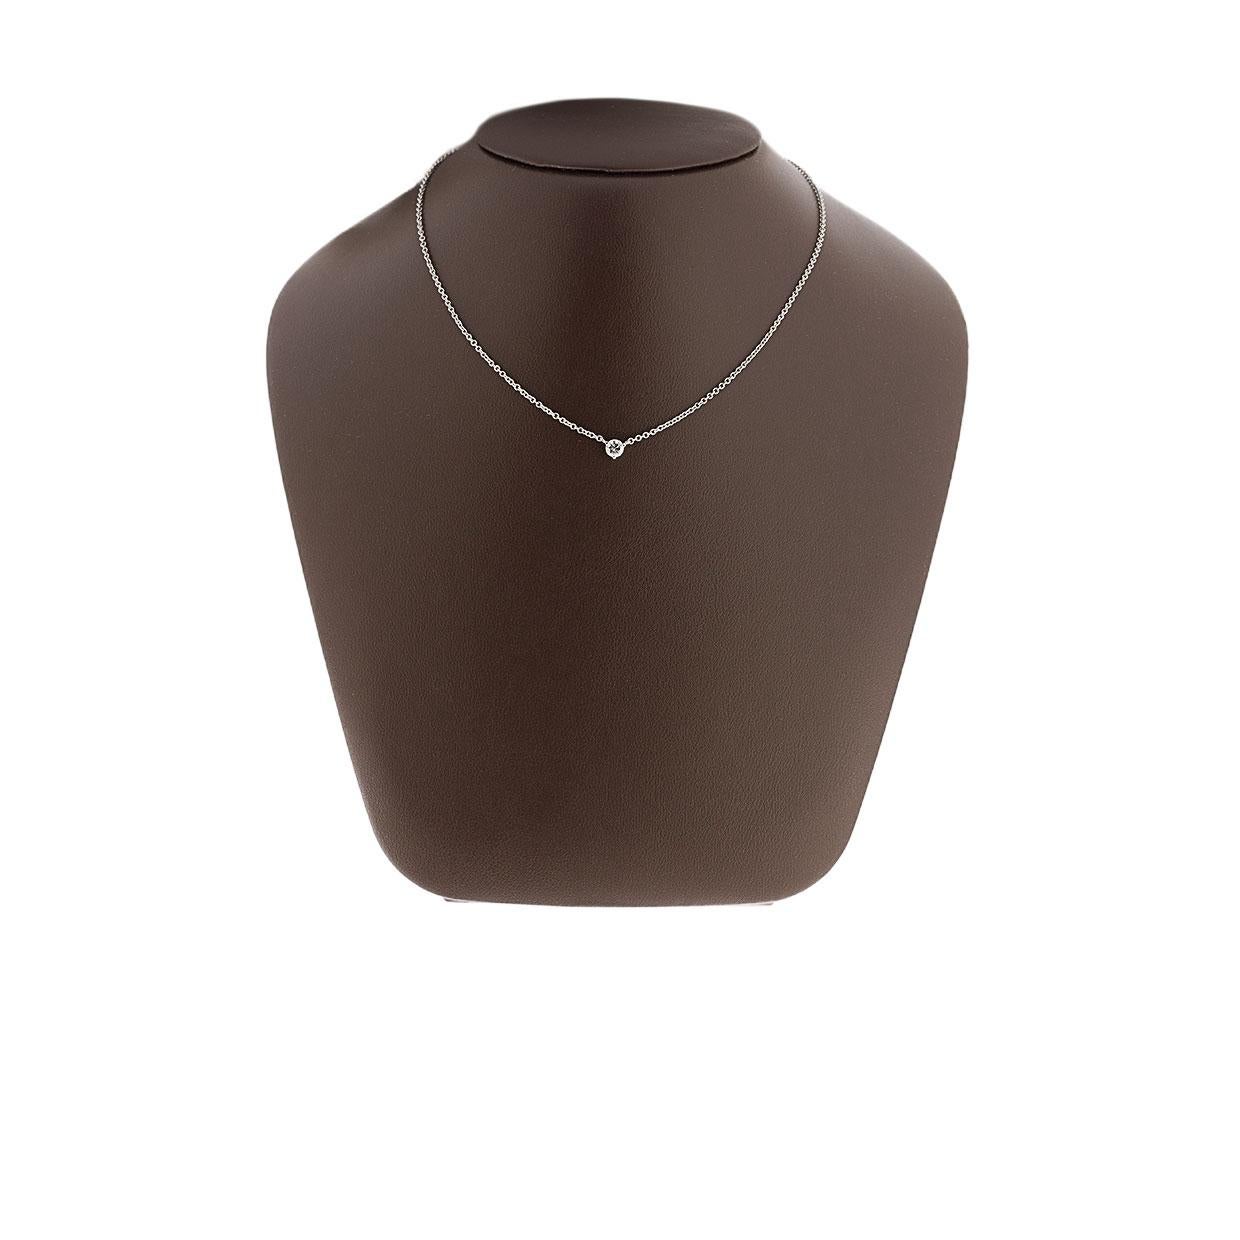 Item Details:
Estimated Retail - $3,000.00
Brand - Kwiat
Collection - 3-prong
Metal - 950 Platinum
Total Carat Weight (TCW) - 0.33 ct
Style - Solitaire Necklace
Fastening - Lobster Clasp
Length (inches) - 16.00 in

Stone 1 Information:
Stone Type -